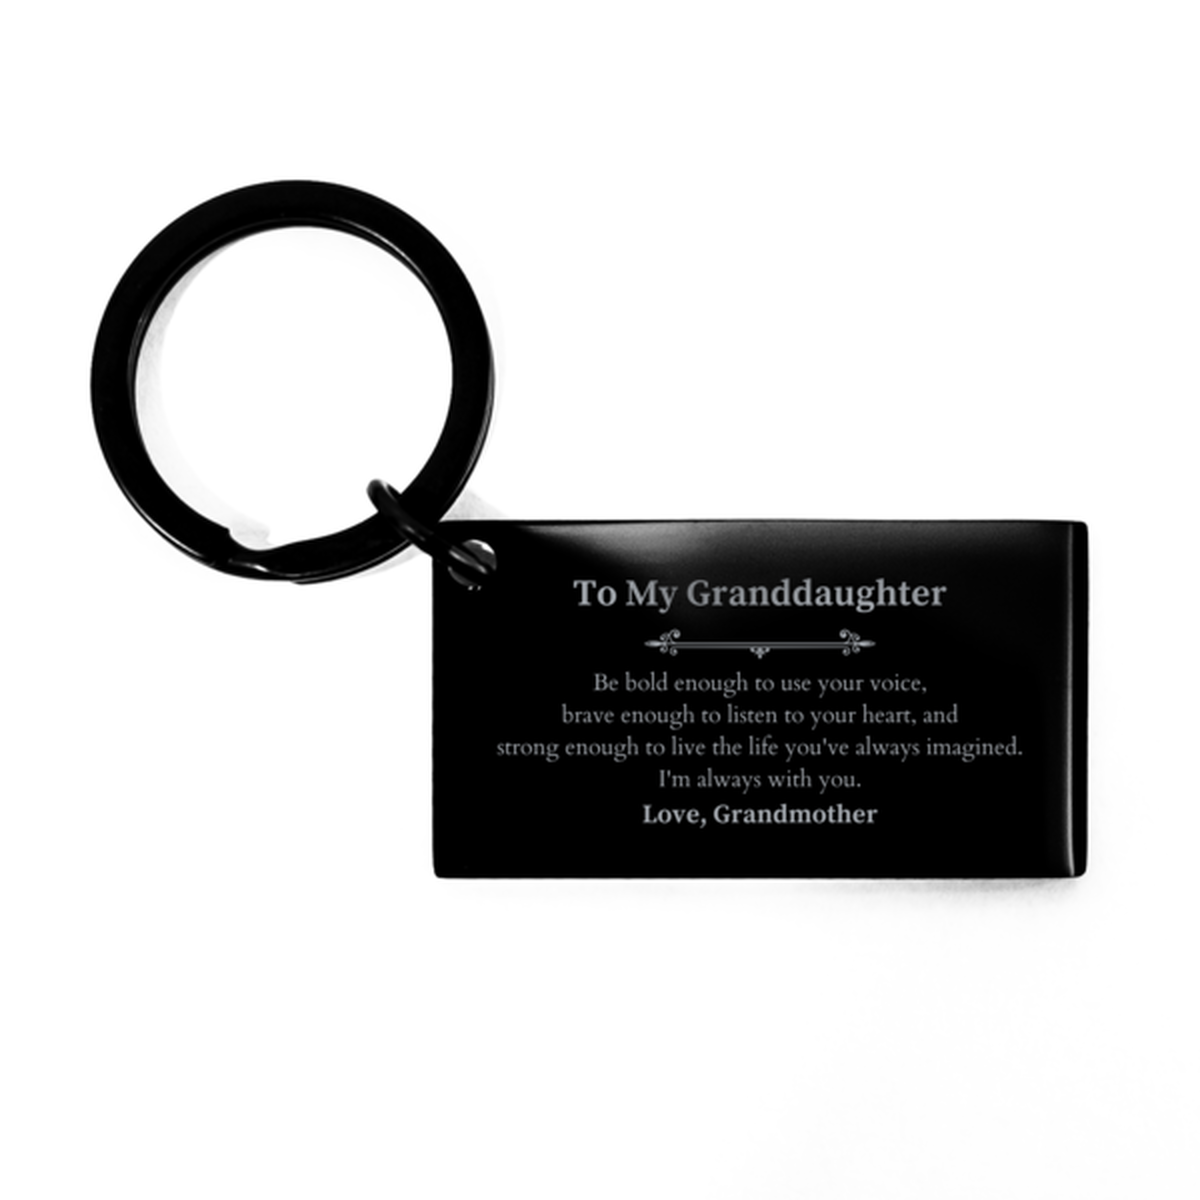 Keepsake Granddaughter Keychain Gift Idea Graduation Christmas Birthday Granddaughter from Grandmother, Granddaughter Be bold enough to use your voice, brave enough to listen to your heart. Love, Grandmother